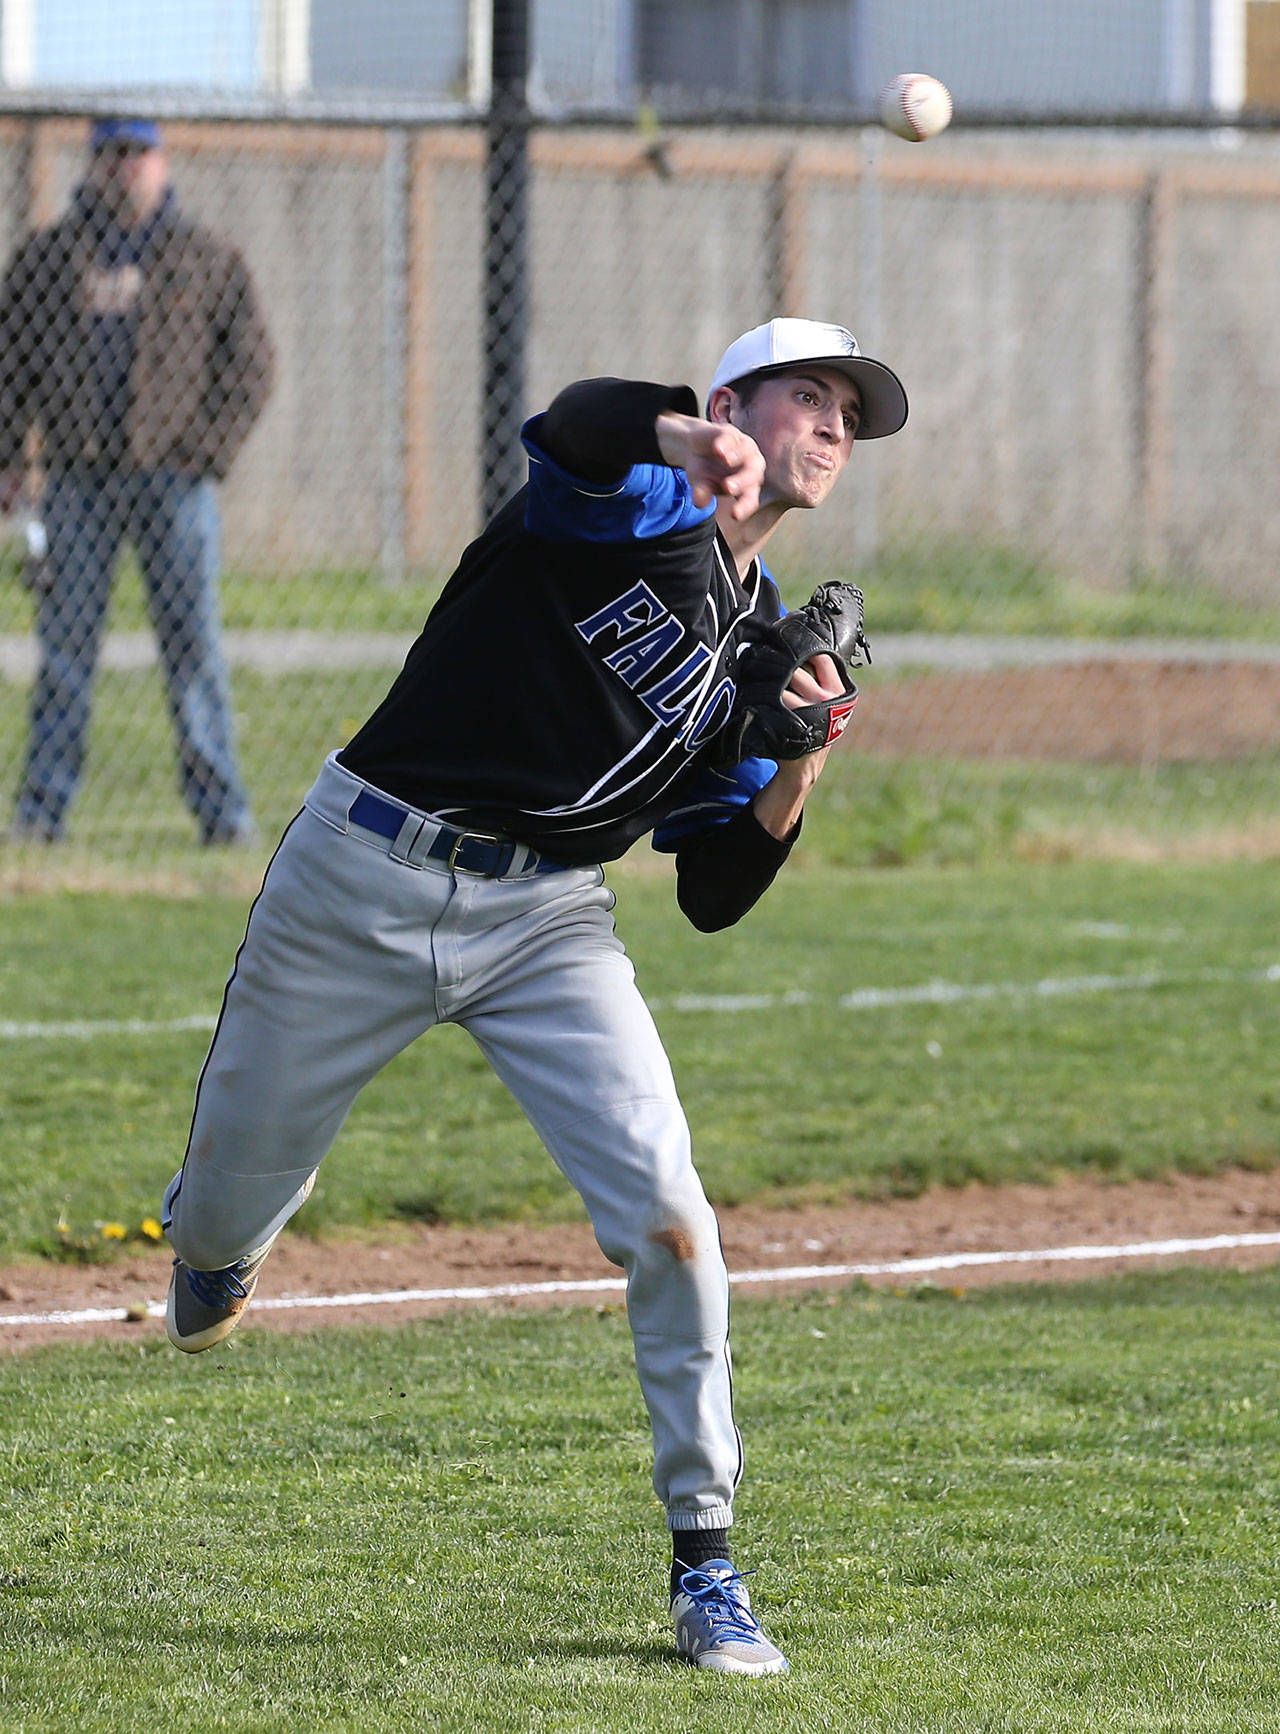 Pitcher Jon Bartel fields a ball in front of the mound and throws to first. (Photo by John Fisken)